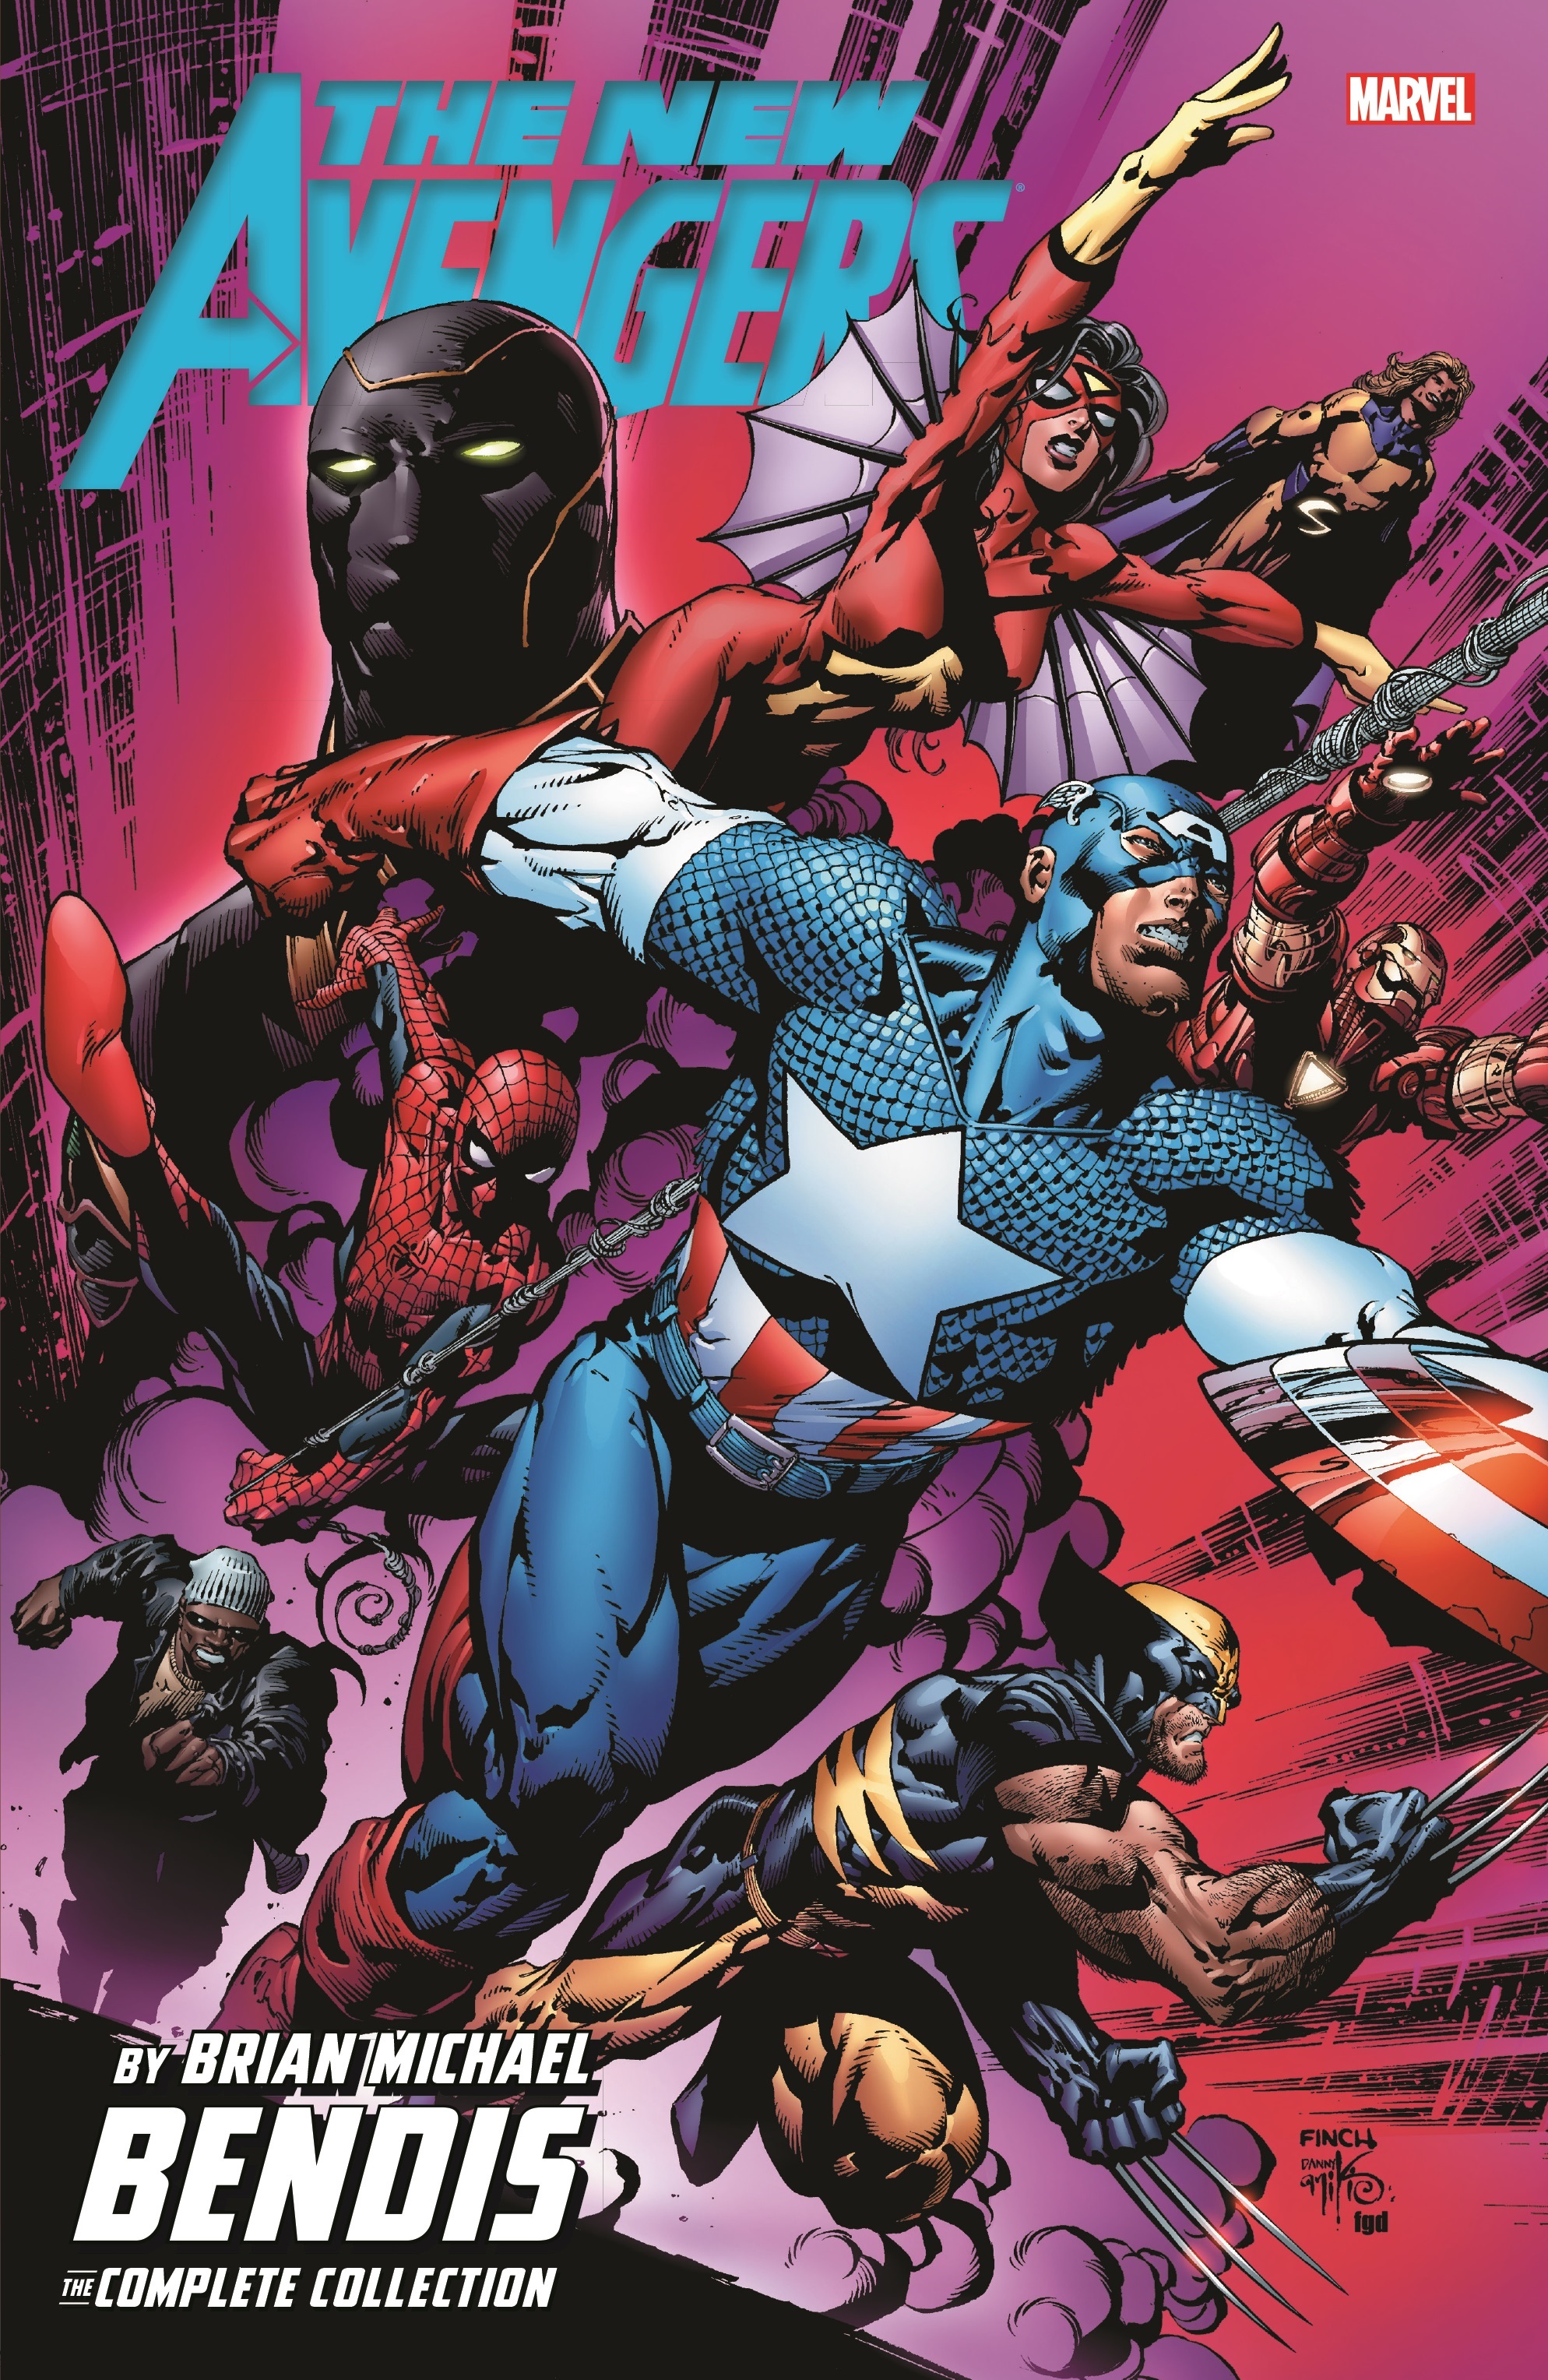 New Avengers by Brian Michael Bendis: The Complete Collection Vol. 2 (Trade Paperback)